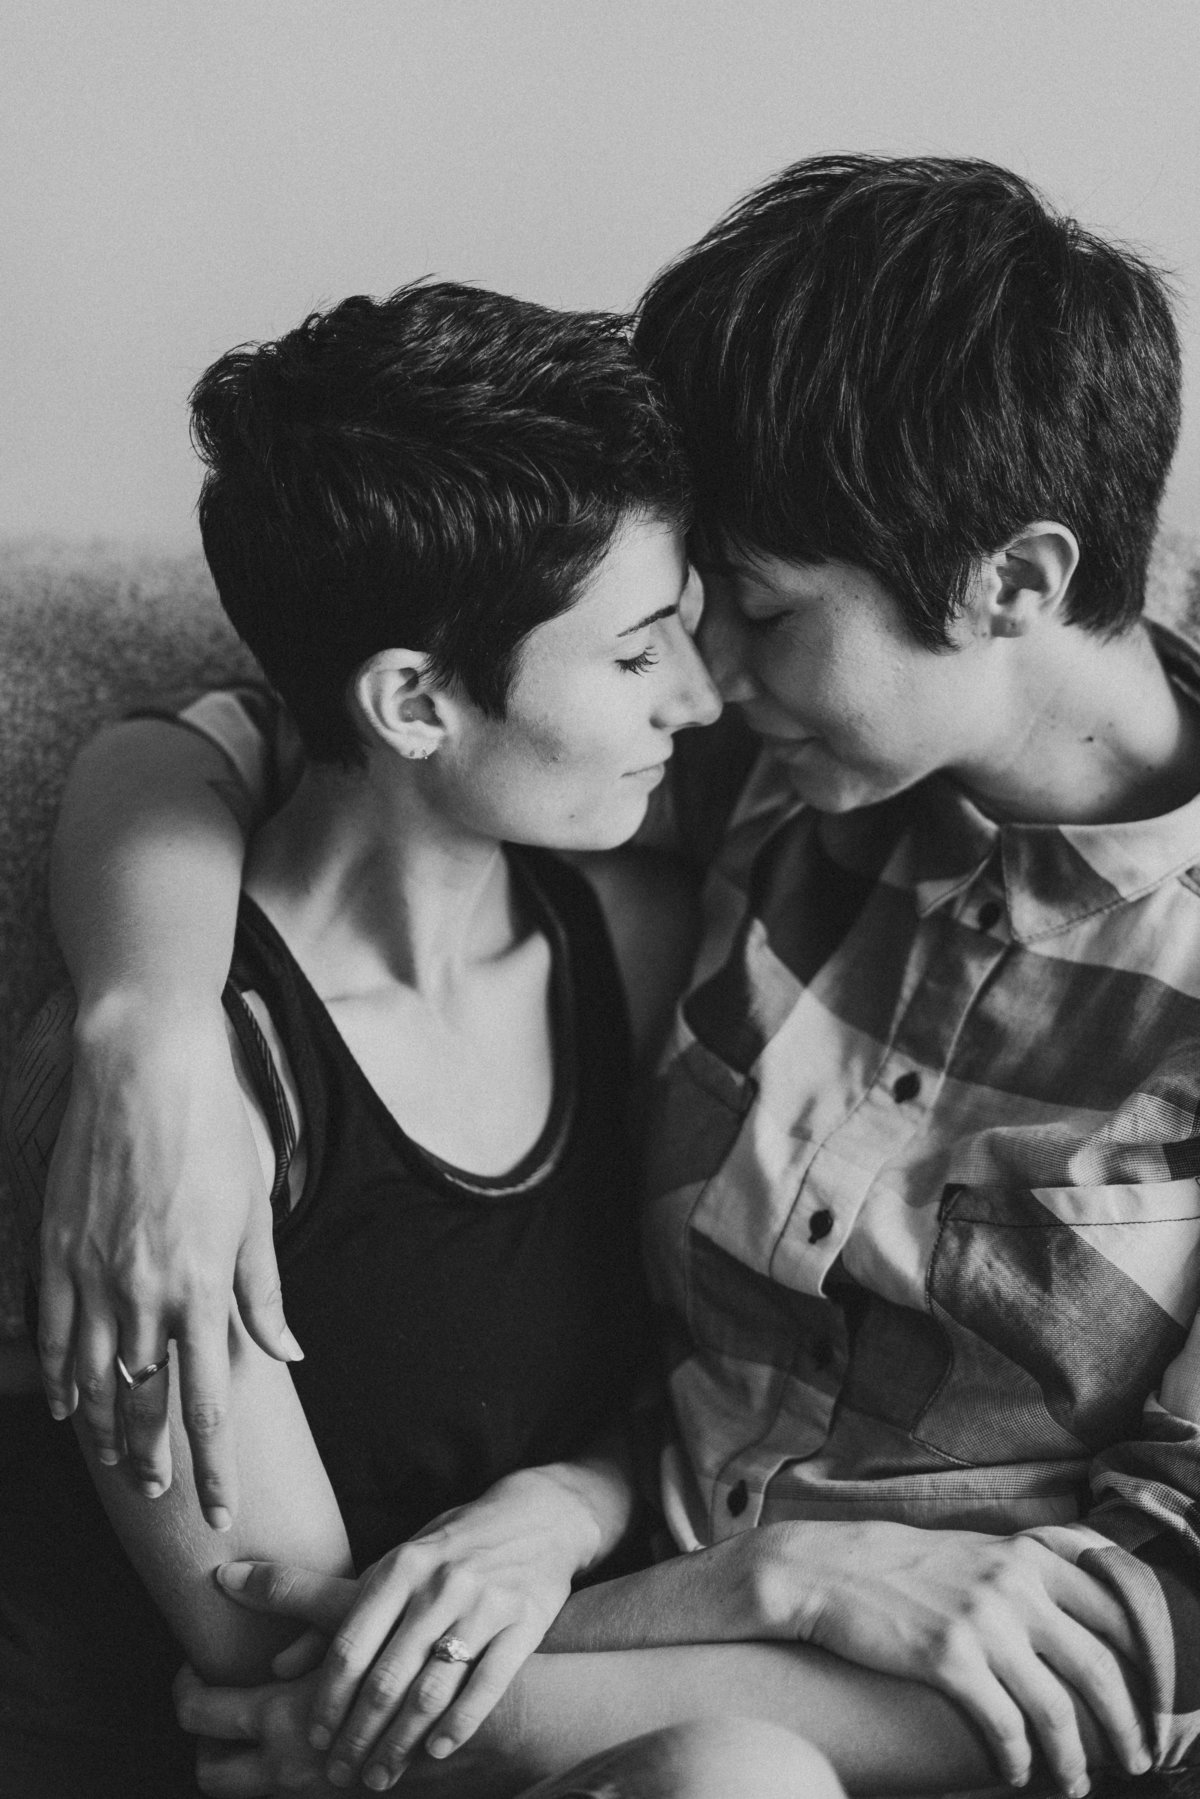 BLACK AND WHITE ROMANTIC IMAGE OF LESBIAN COUPLE